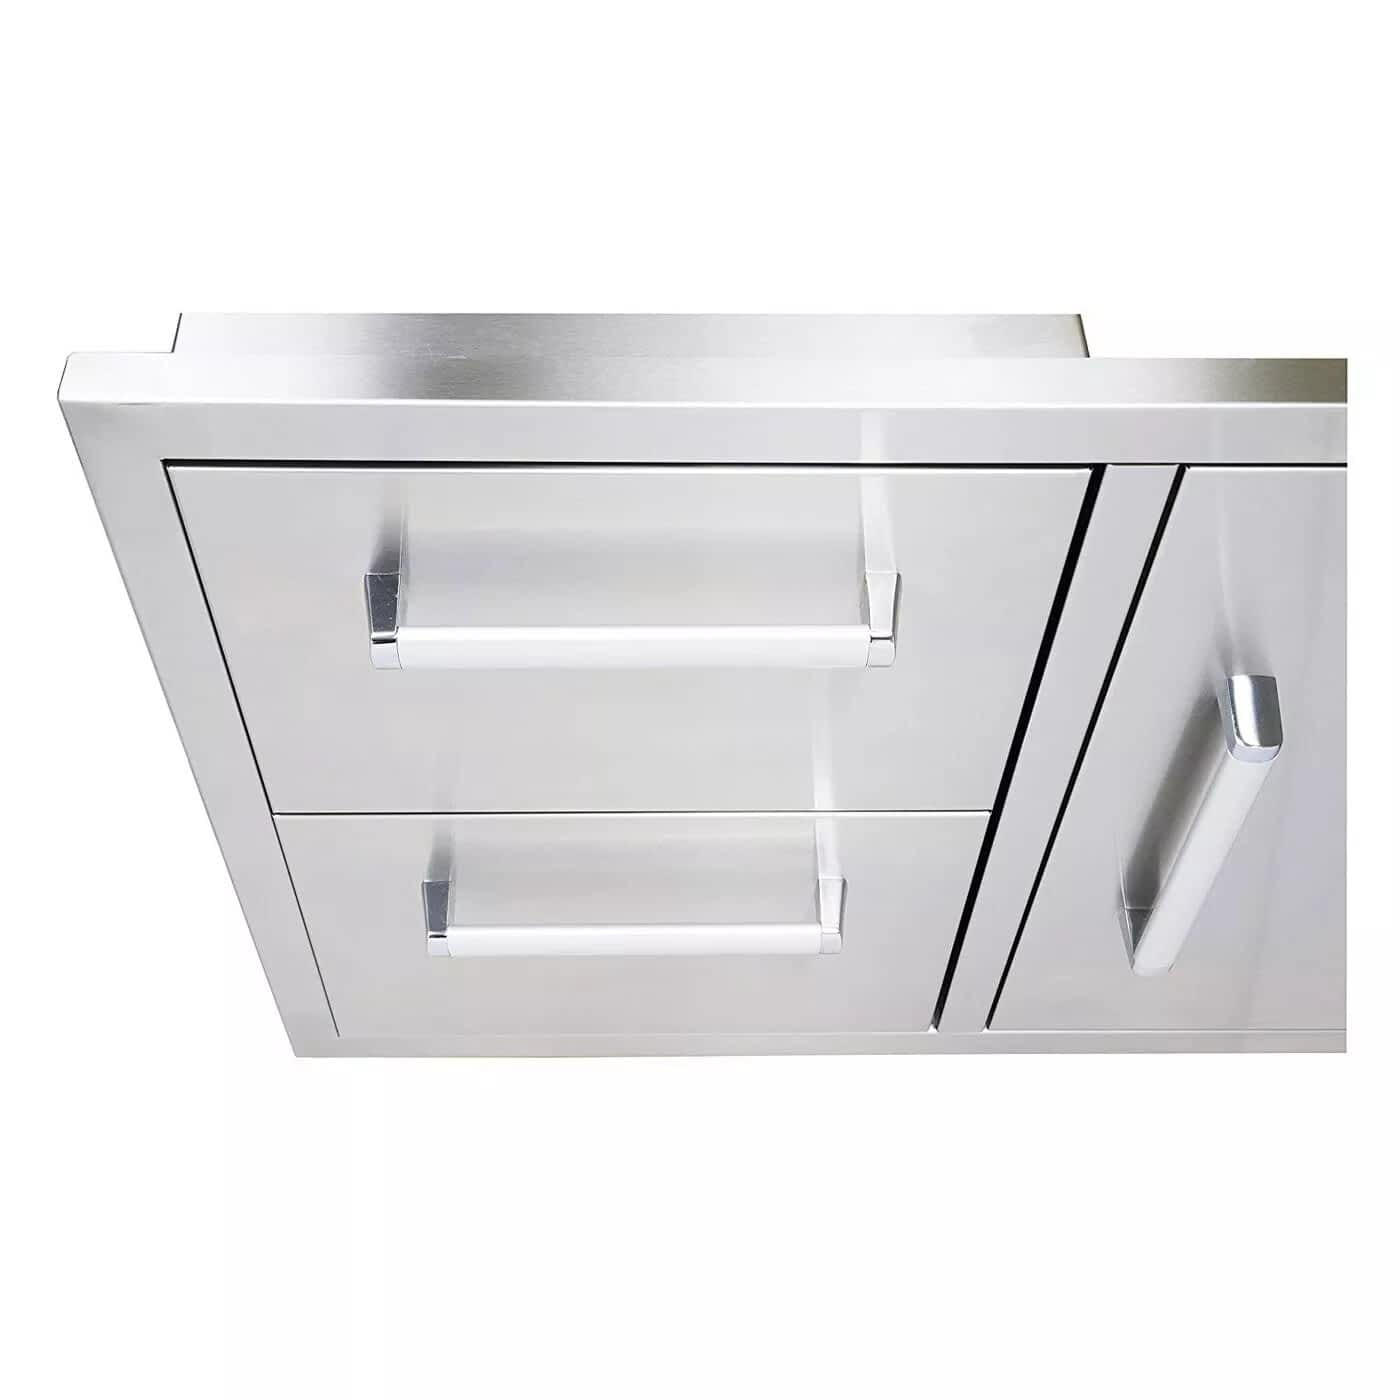 bonfire-stainless-steel-outdoor-kitchen-and-bbq-island-door-and-drawer-combo-CBADC-Closeup